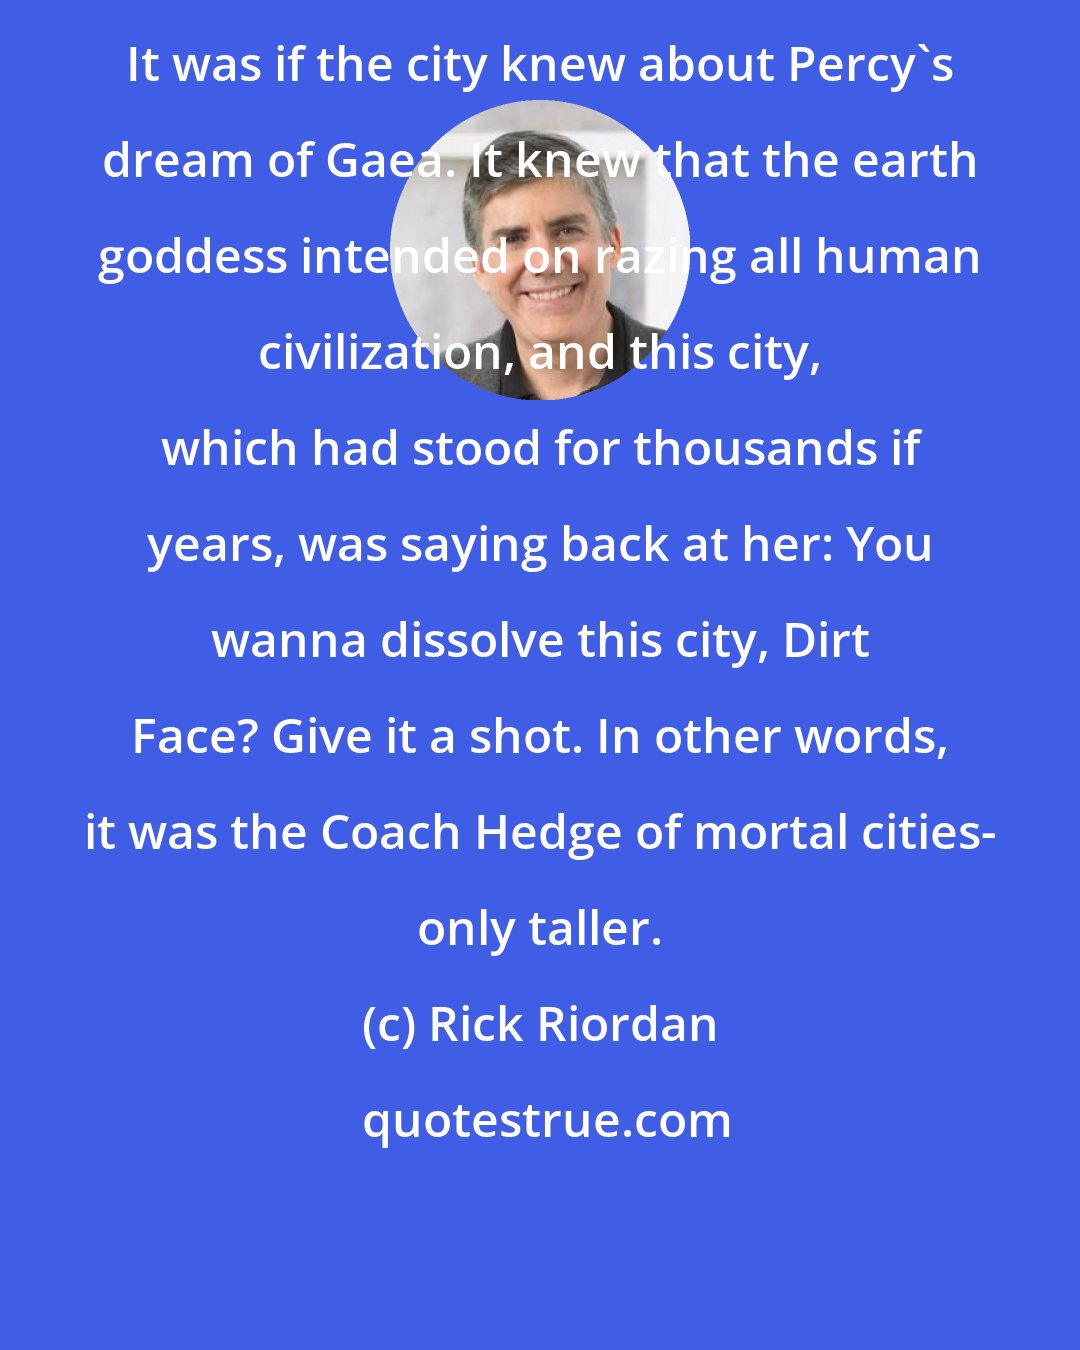 Rick Riordan: It was if the city knew about Percy's dream of Gaea. It knew that the earth goddess intended on razing all human civilization, and this city, which had stood for thousands if years, was saying back at her: You wanna dissolve this city, Dirt Face? Give it a shot. In other words, it was the Coach Hedge of mortal cities- only taller.